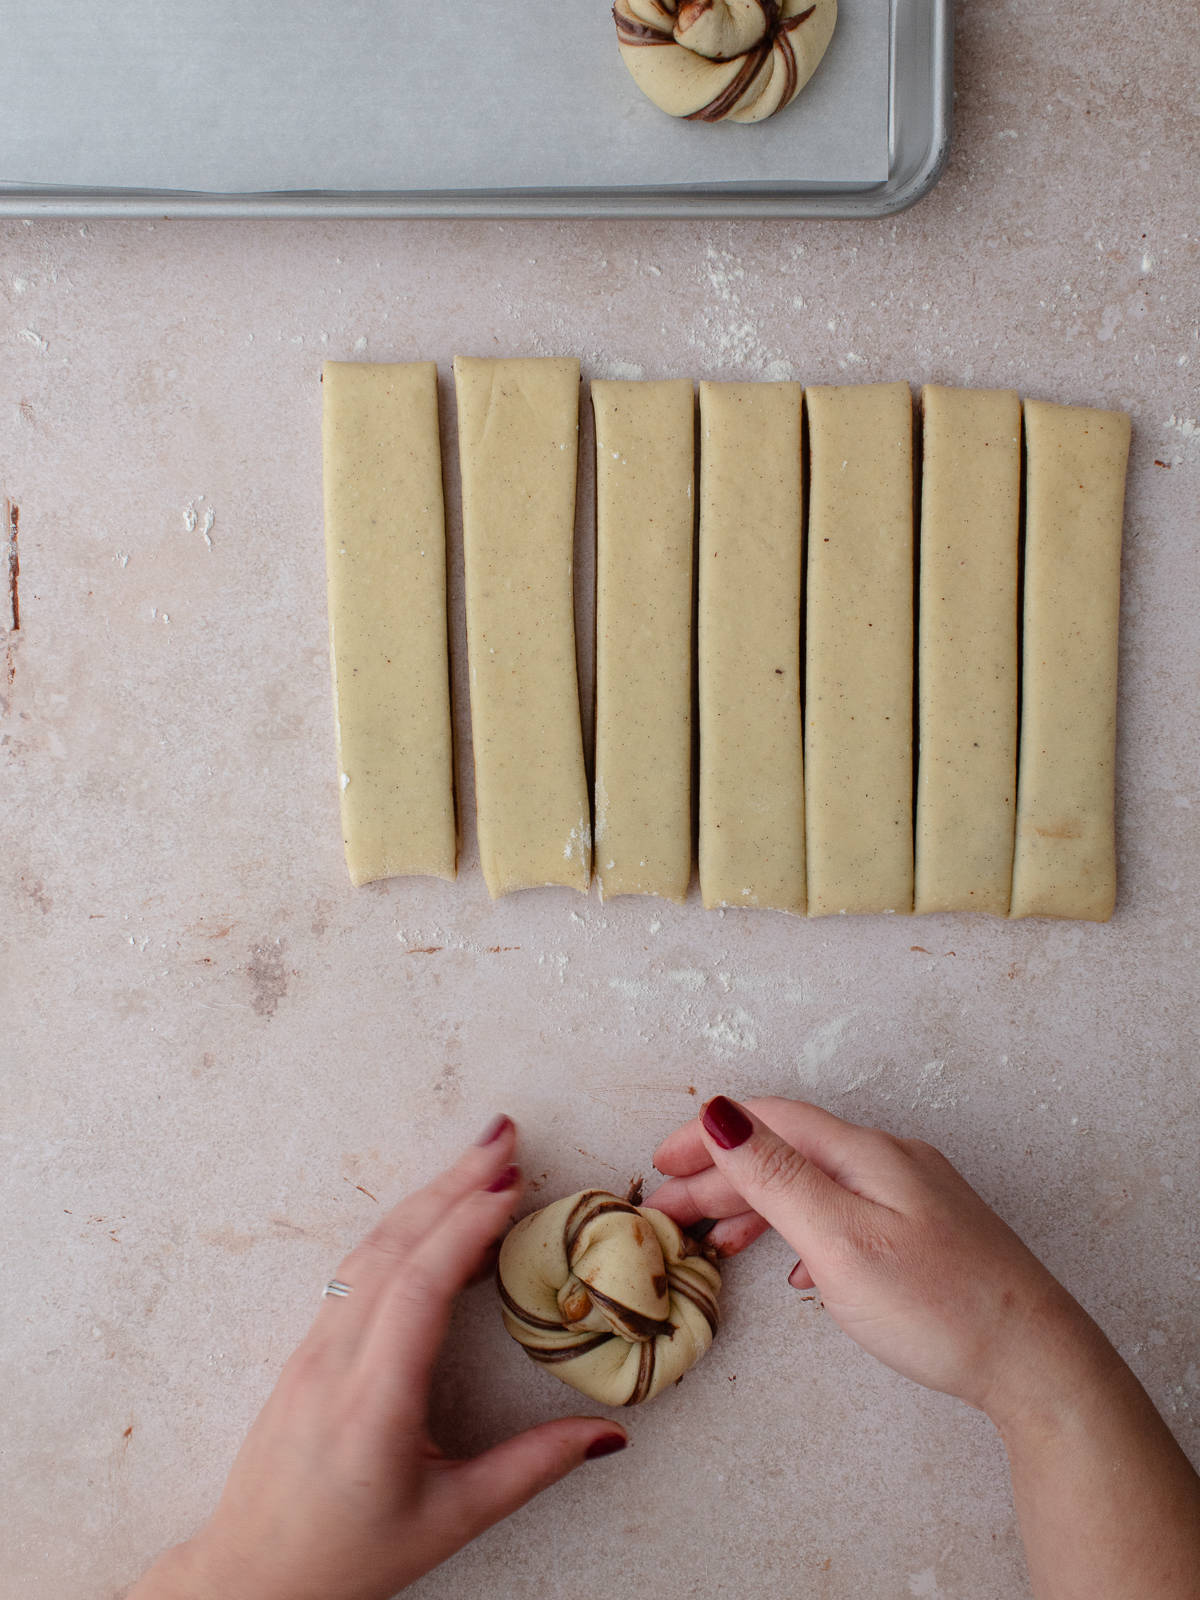 Creating strips of dough into knots